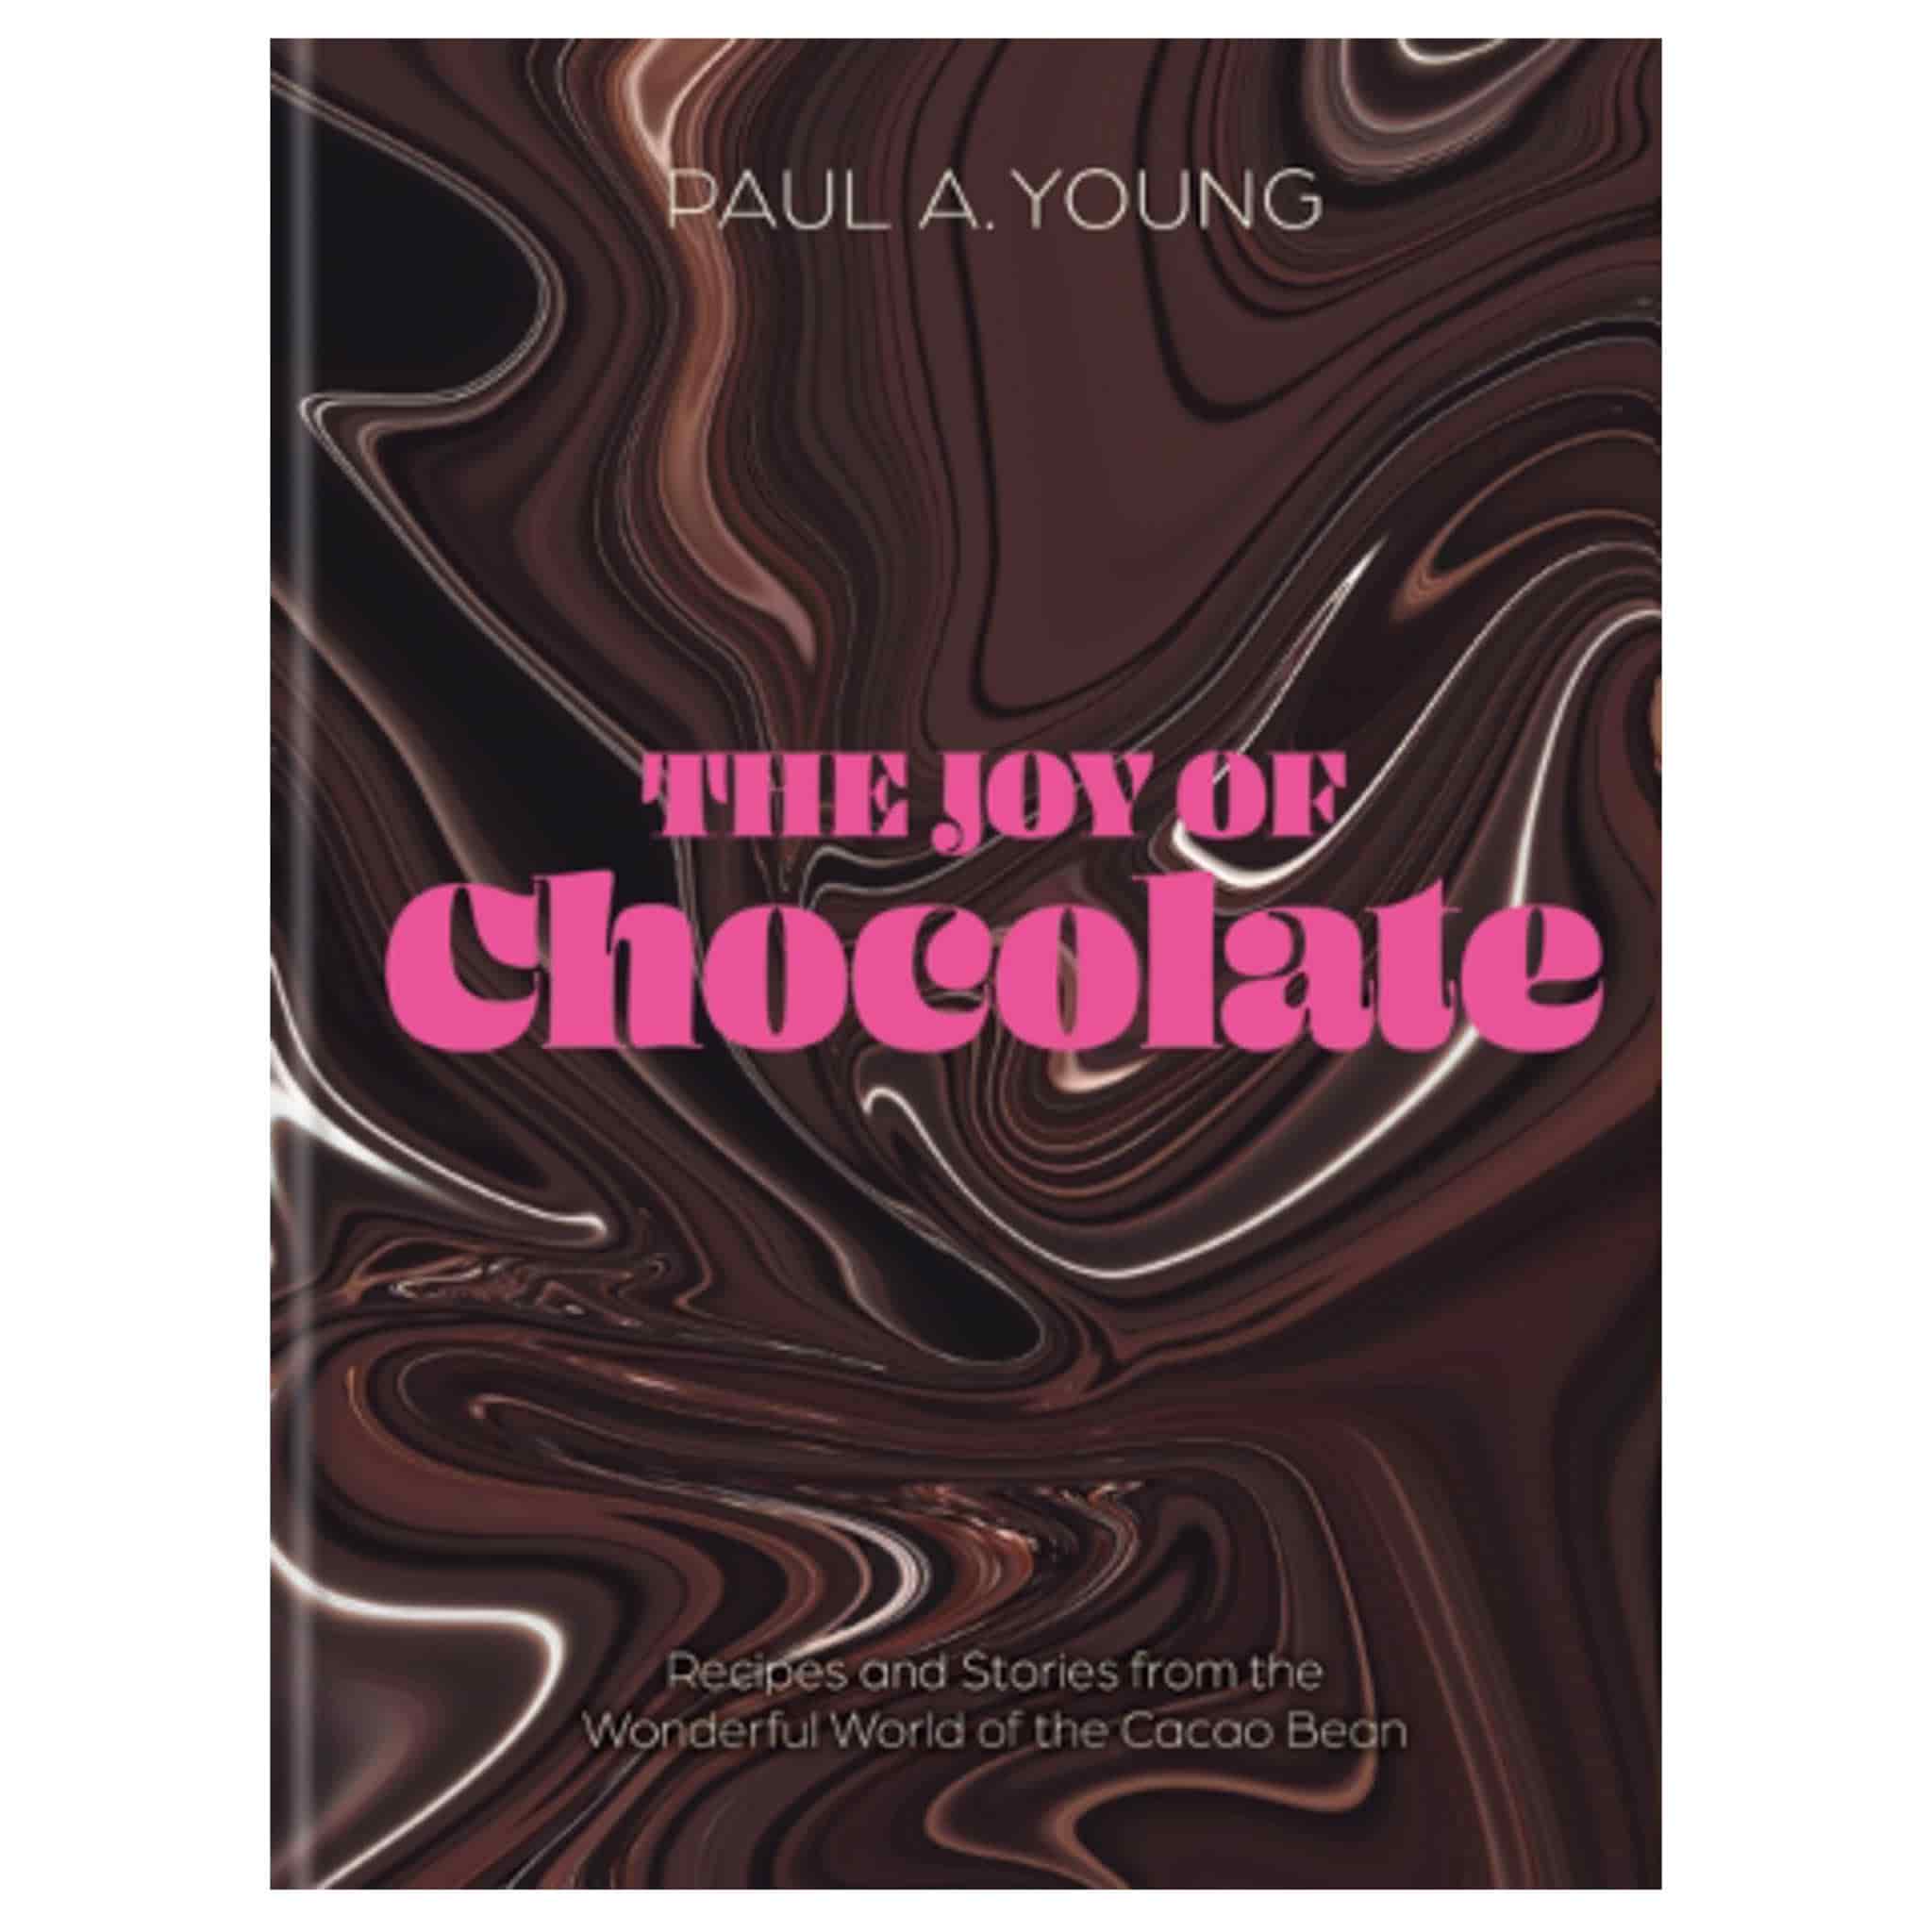 The Joy of Chocolate: Recipes and Stories from the Wonderful World of the Cacao Bean, by Paul A. Young